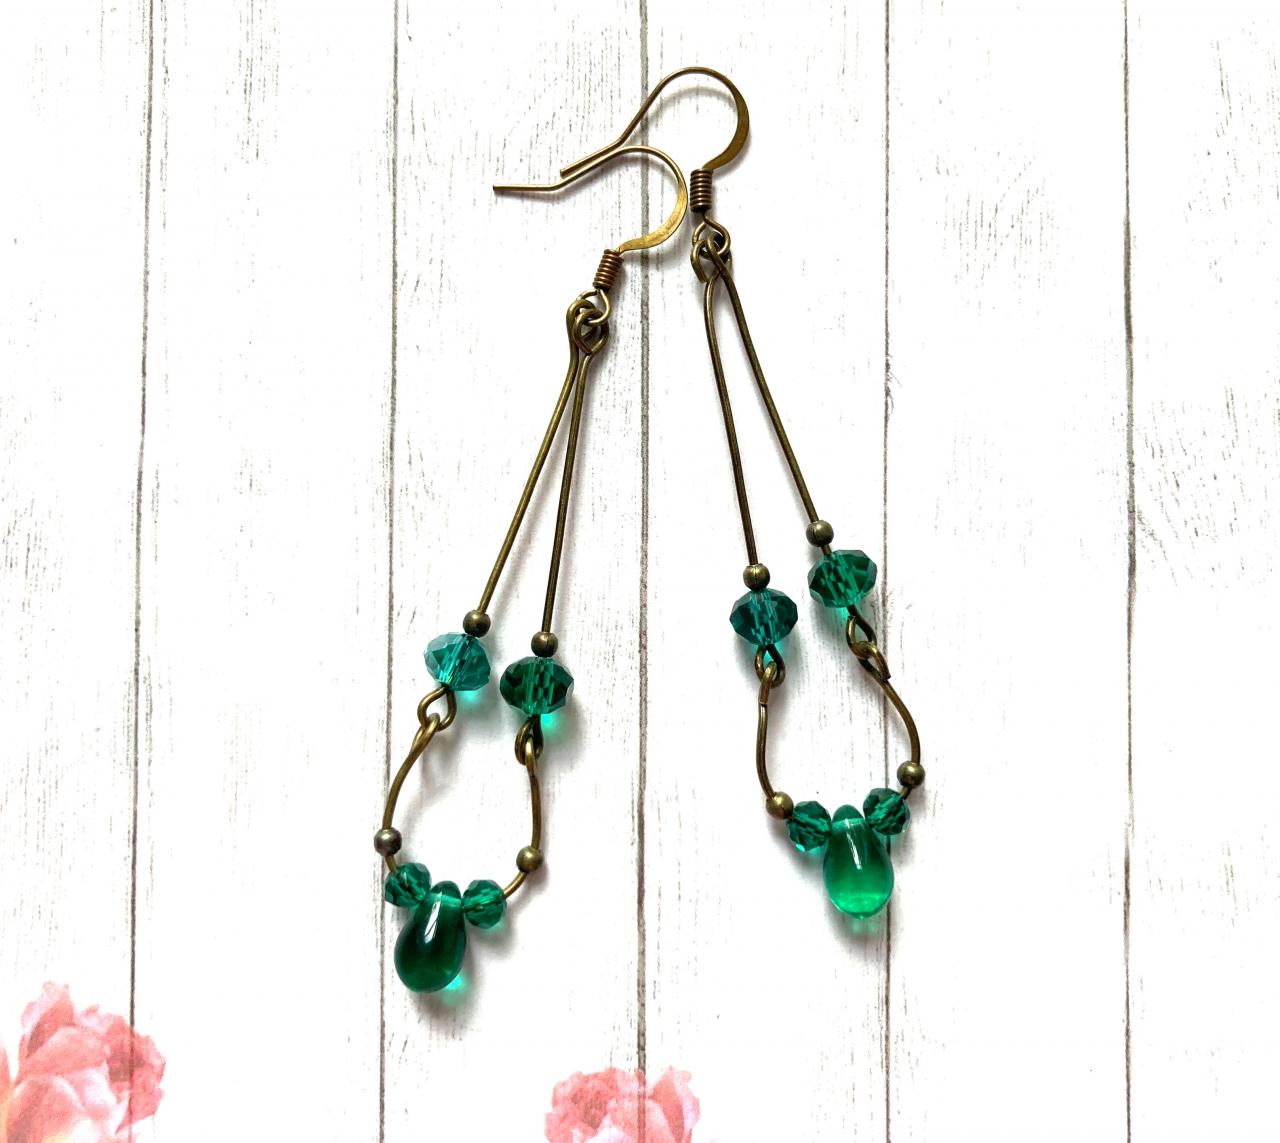 Beautiful Brass Earrings With Shimmering Teal Glass Beads, Selma Dreams